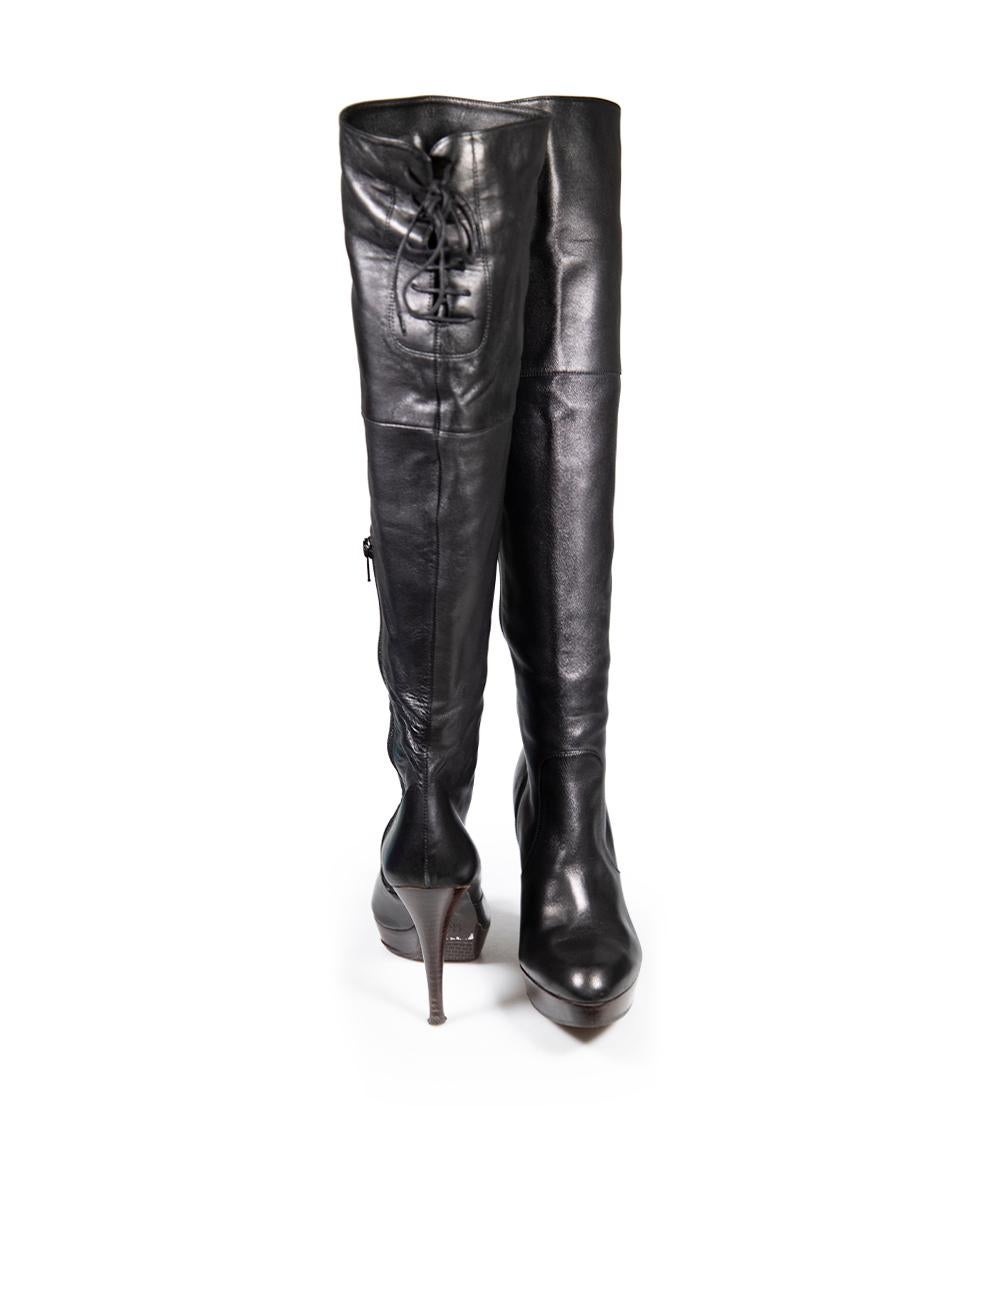 Stuart Weitzman Black Leather Laced Knee High Boots Size IT 37 In Good Condition For Sale In London, GB